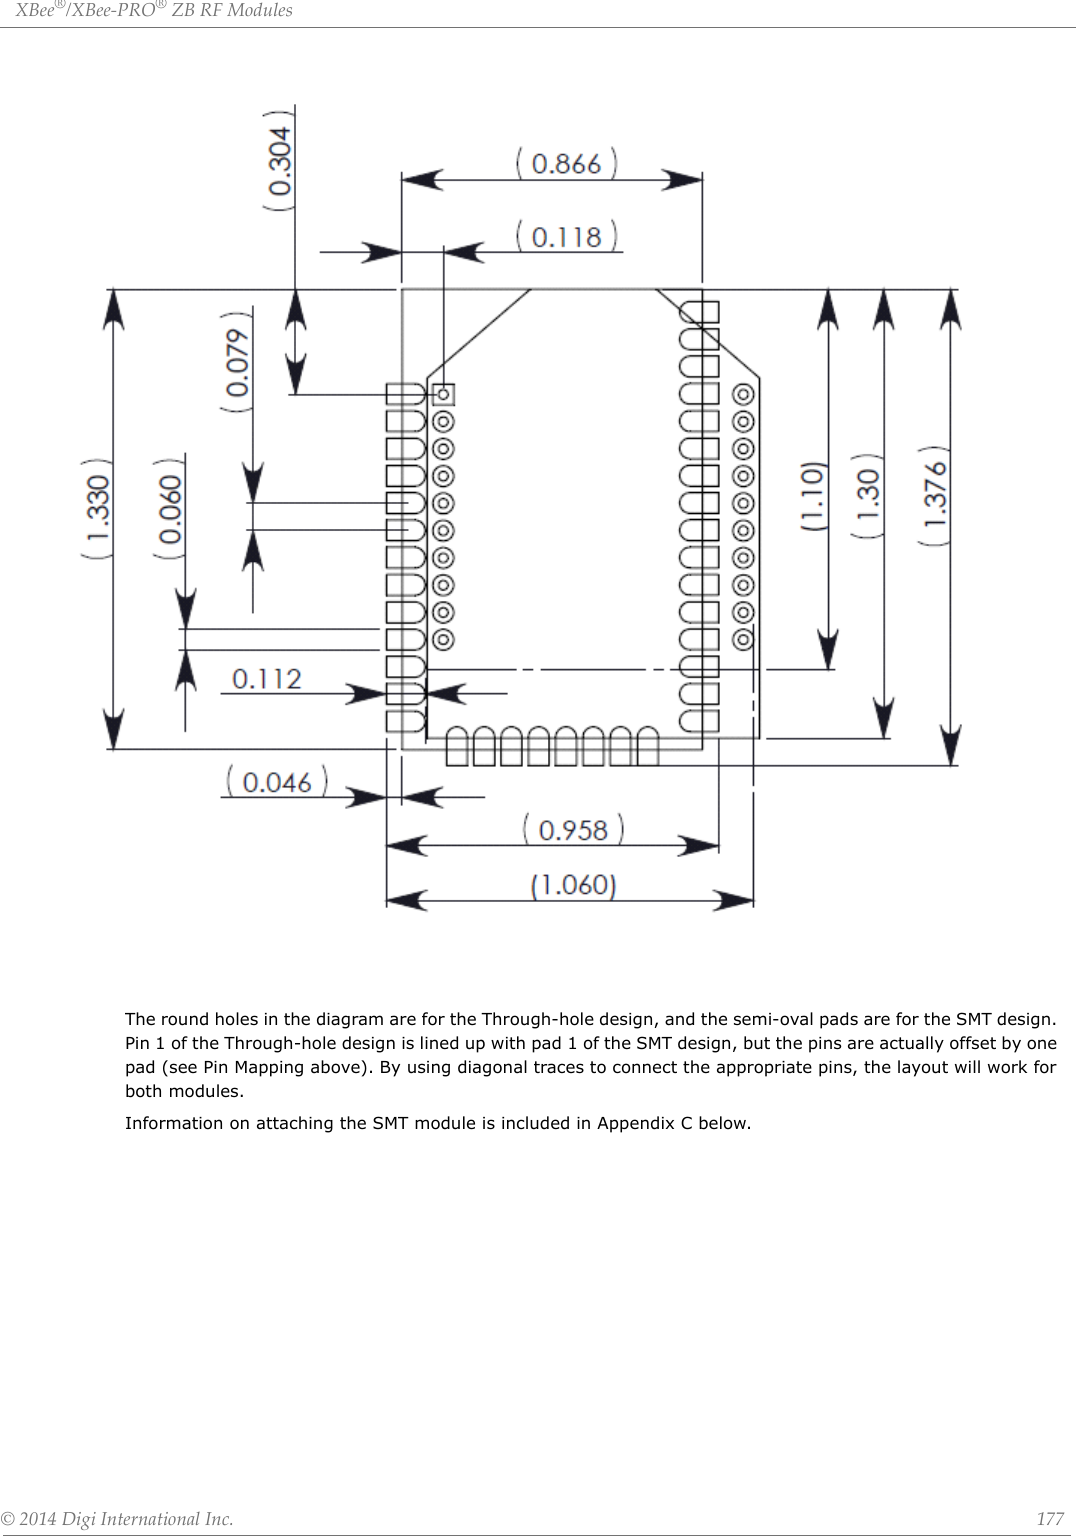 XBee®/XBee‐PRO®ZBRFModules©2014DigiInternationalInc. 177The round holes in the diagram are for the Through-hole design, and the semi-oval pads are for the SMT design. Pin 1 of the Through-hole design is lined up with pad 1 of the SMT design, but the pins are actually offset by one pad (see Pin Mapping above). By using diagonal traces to connect the appropriate pins, the layout will work for both modules.Information on attaching the SMT module is included in Appendix C below.